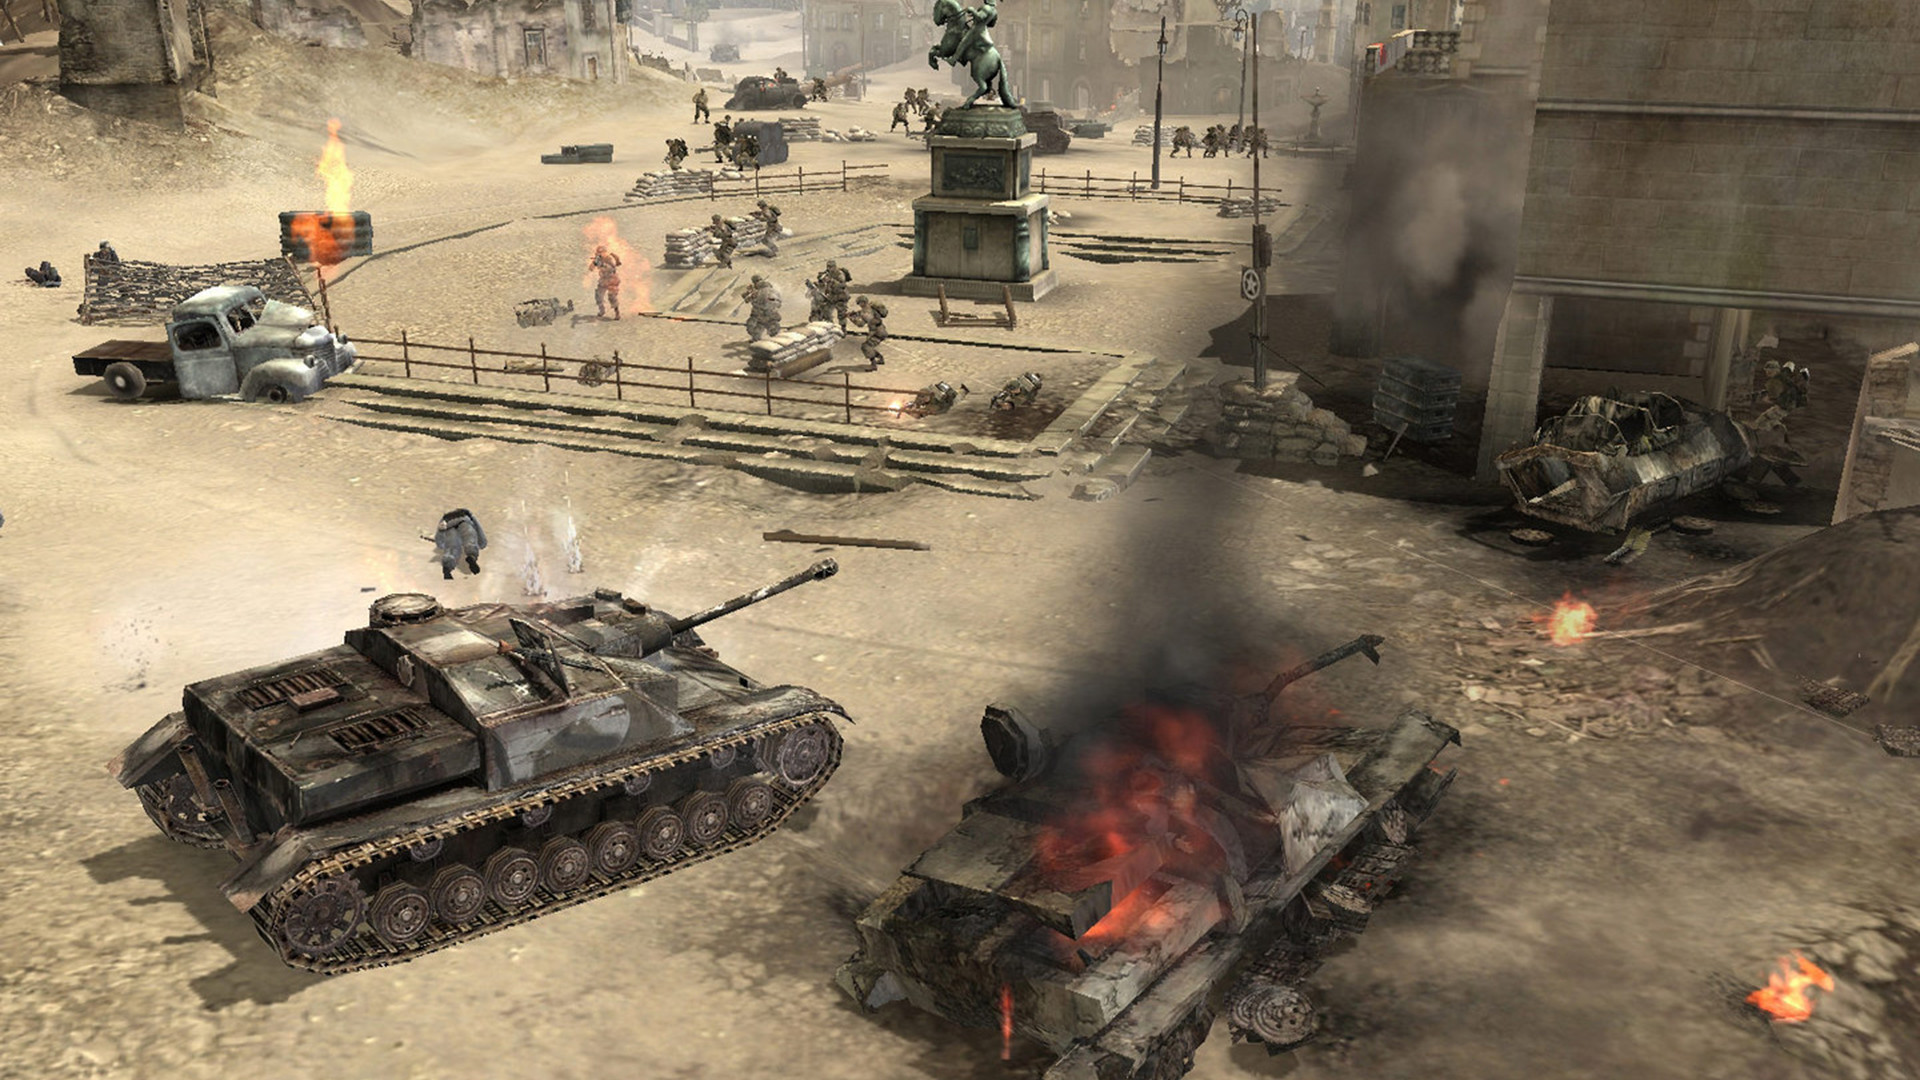 5 best iOS games for strategy gamer - Company - Company of Heroes